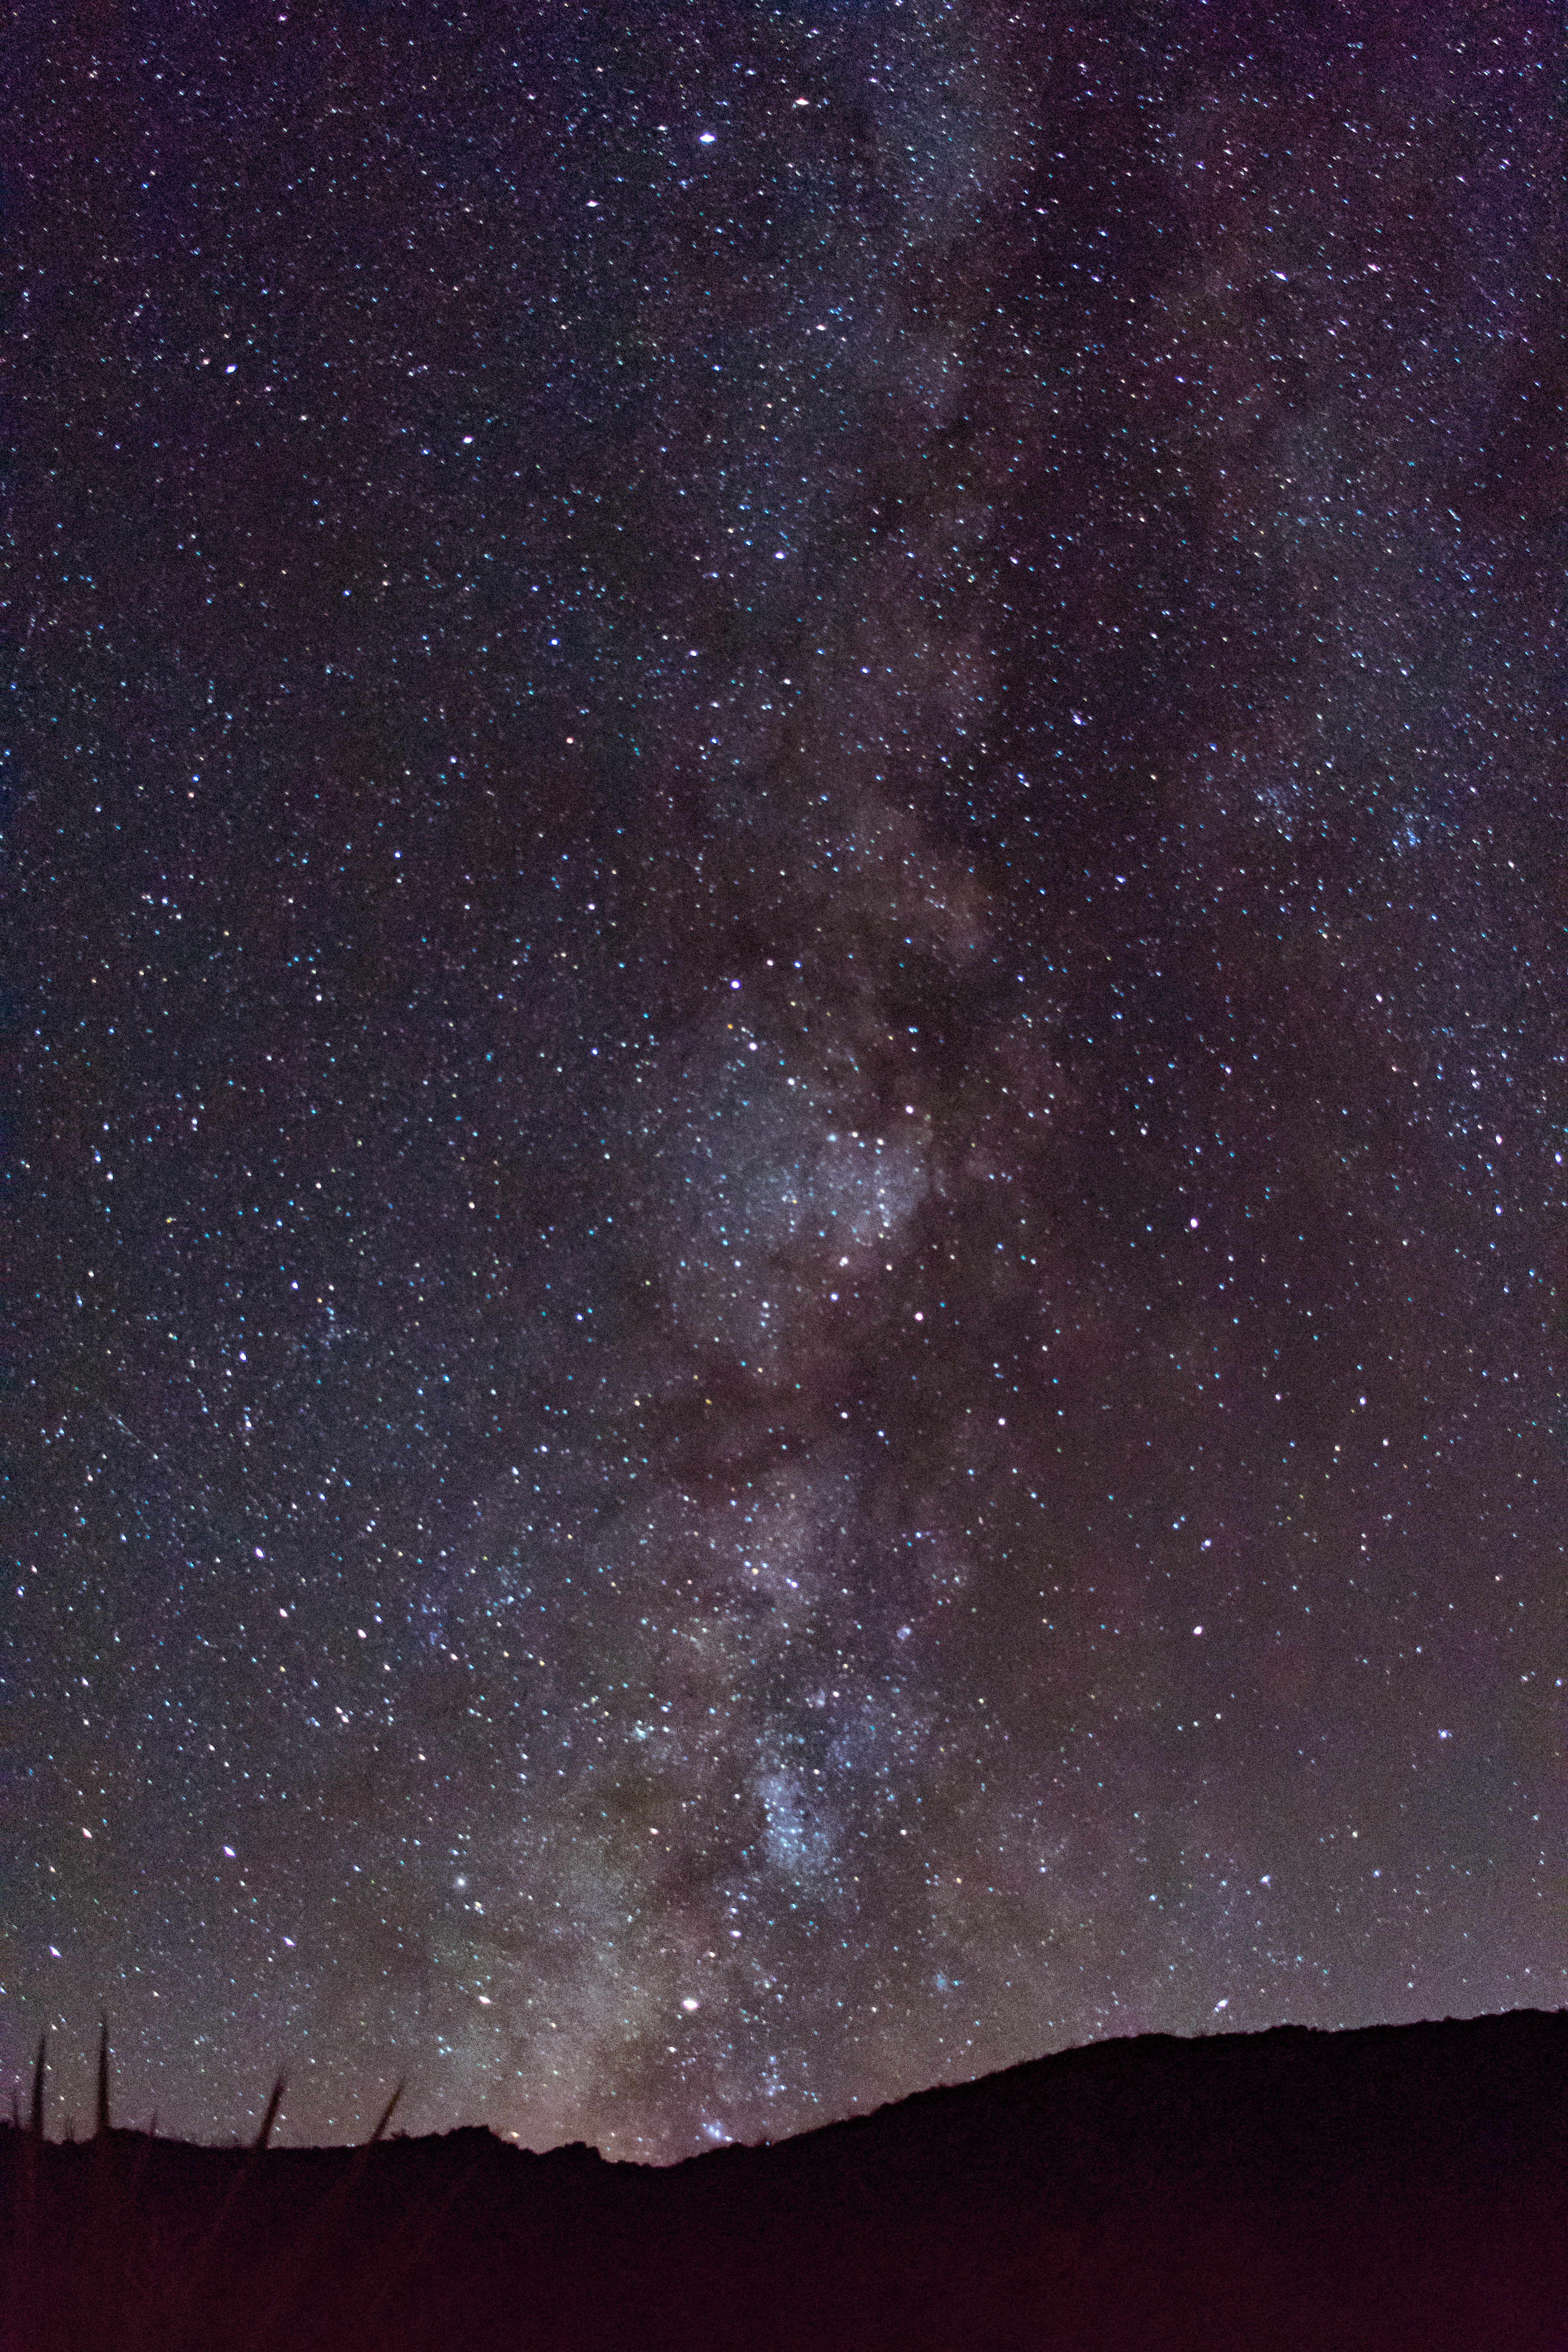 Photo of the Milky Way